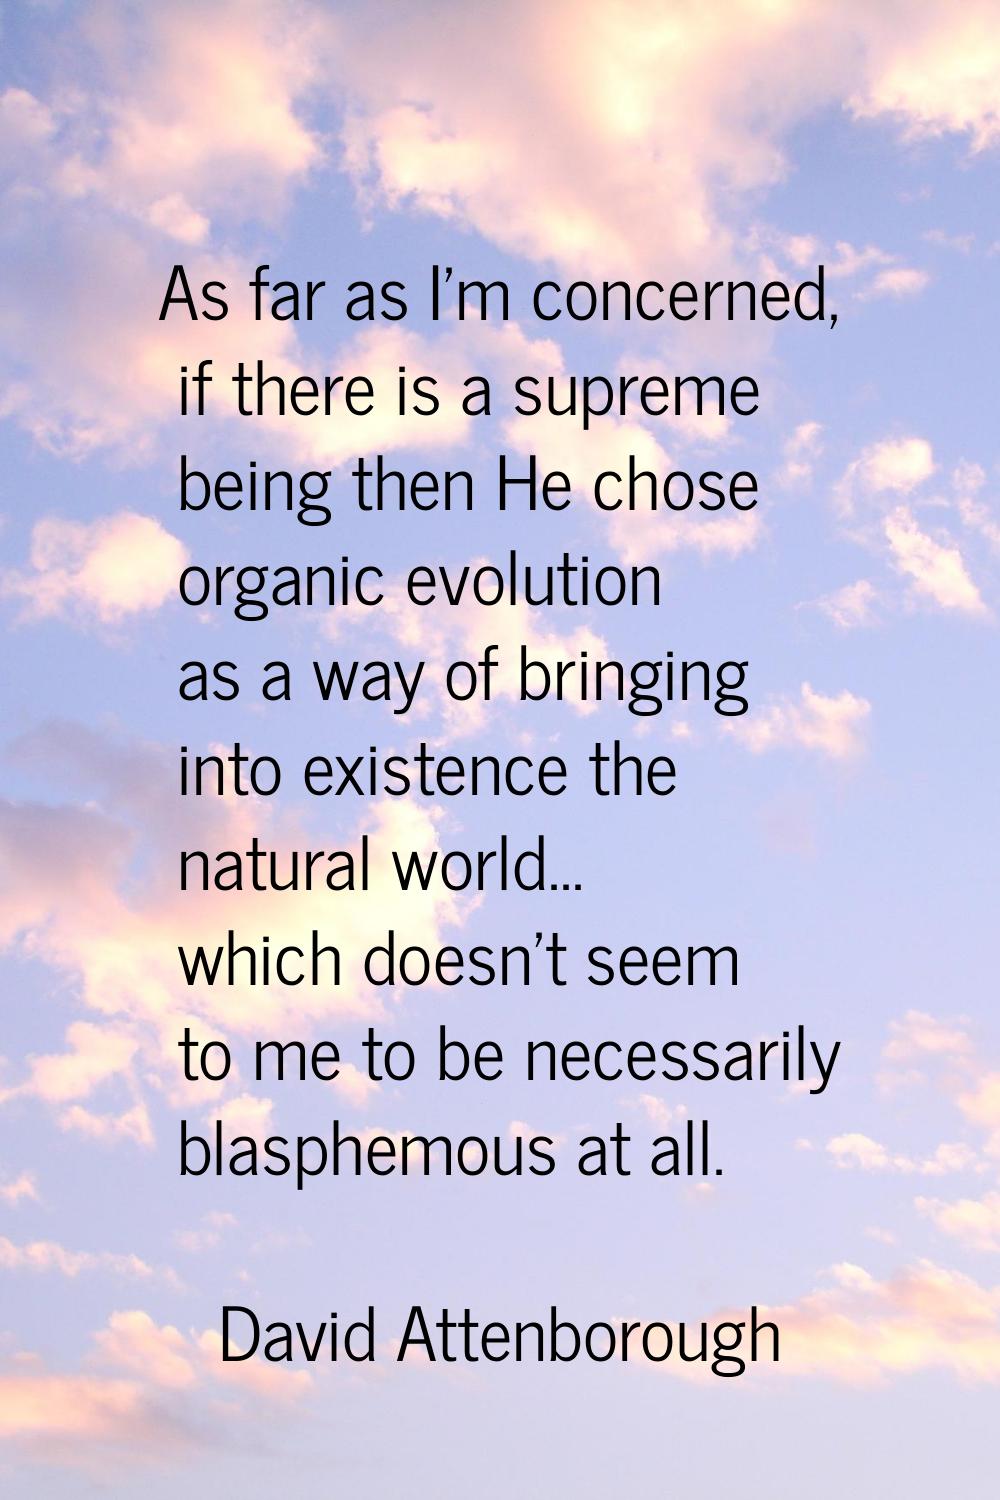 As far as I'm concerned, if there is a supreme being then He chose organic evolution as a way of br